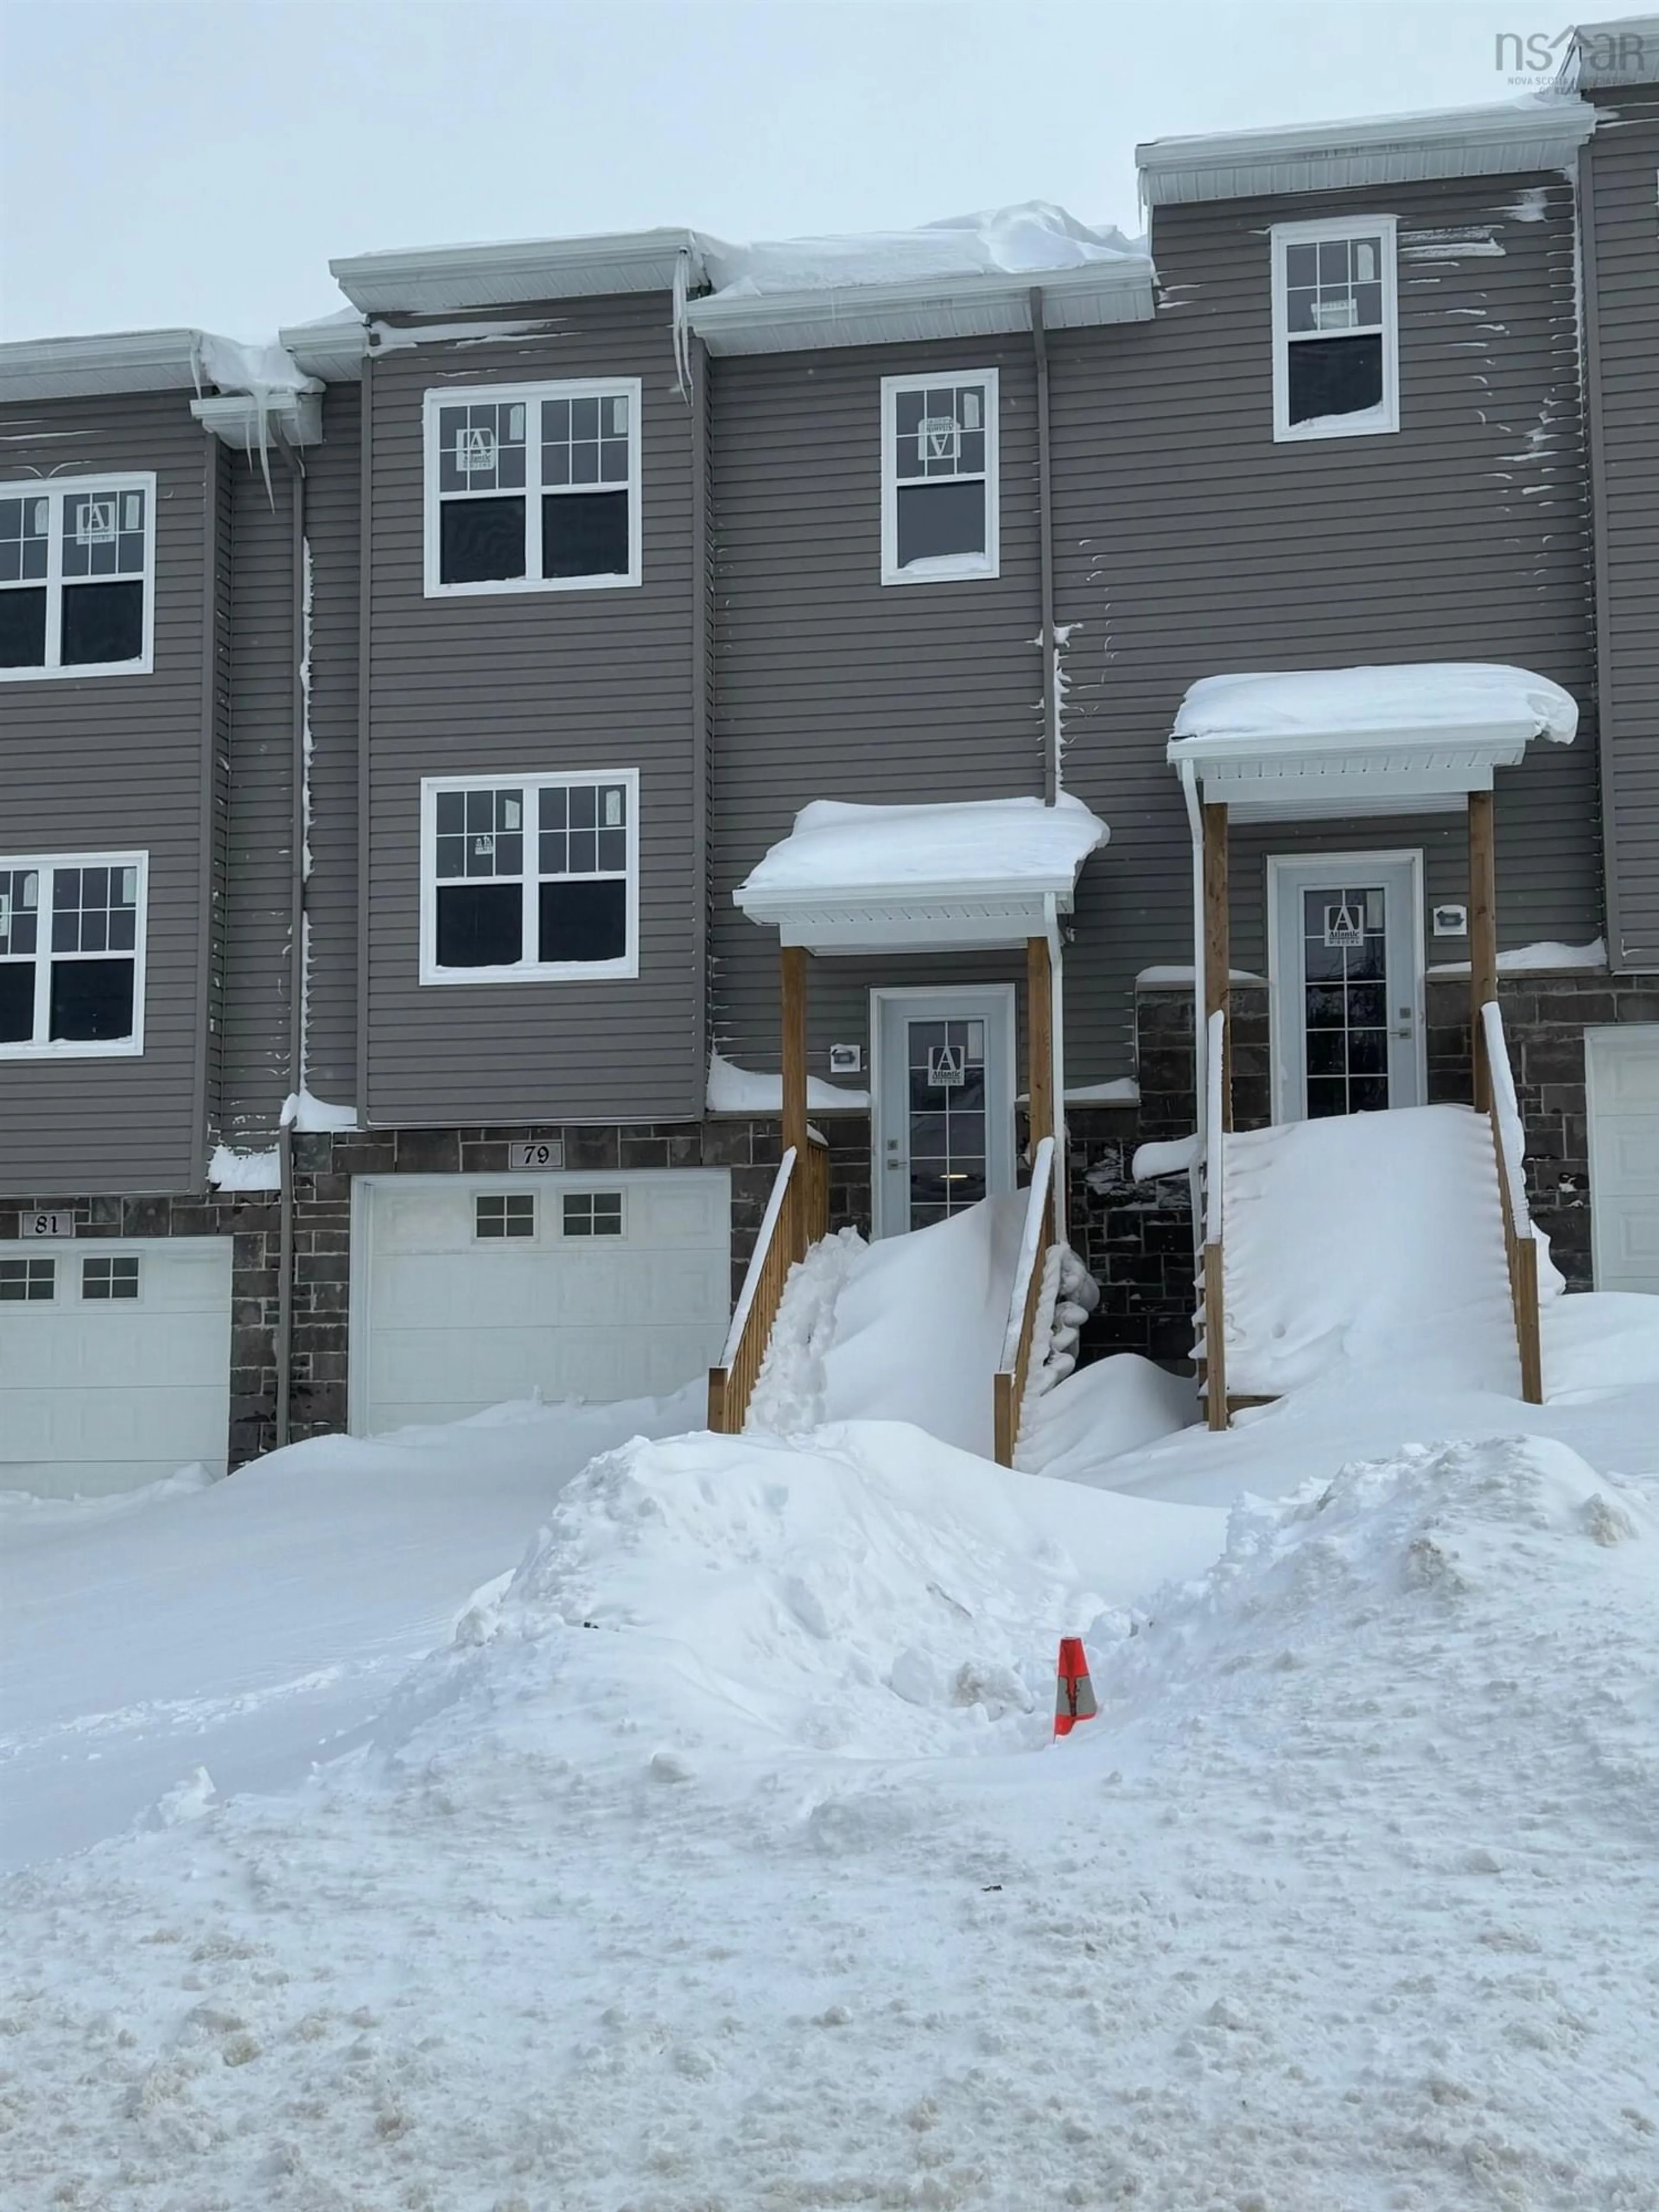 Home with unknown exterior material for 79 Nadia Dr #N12C, Dartmouth Nova Scotia B3A 0B3